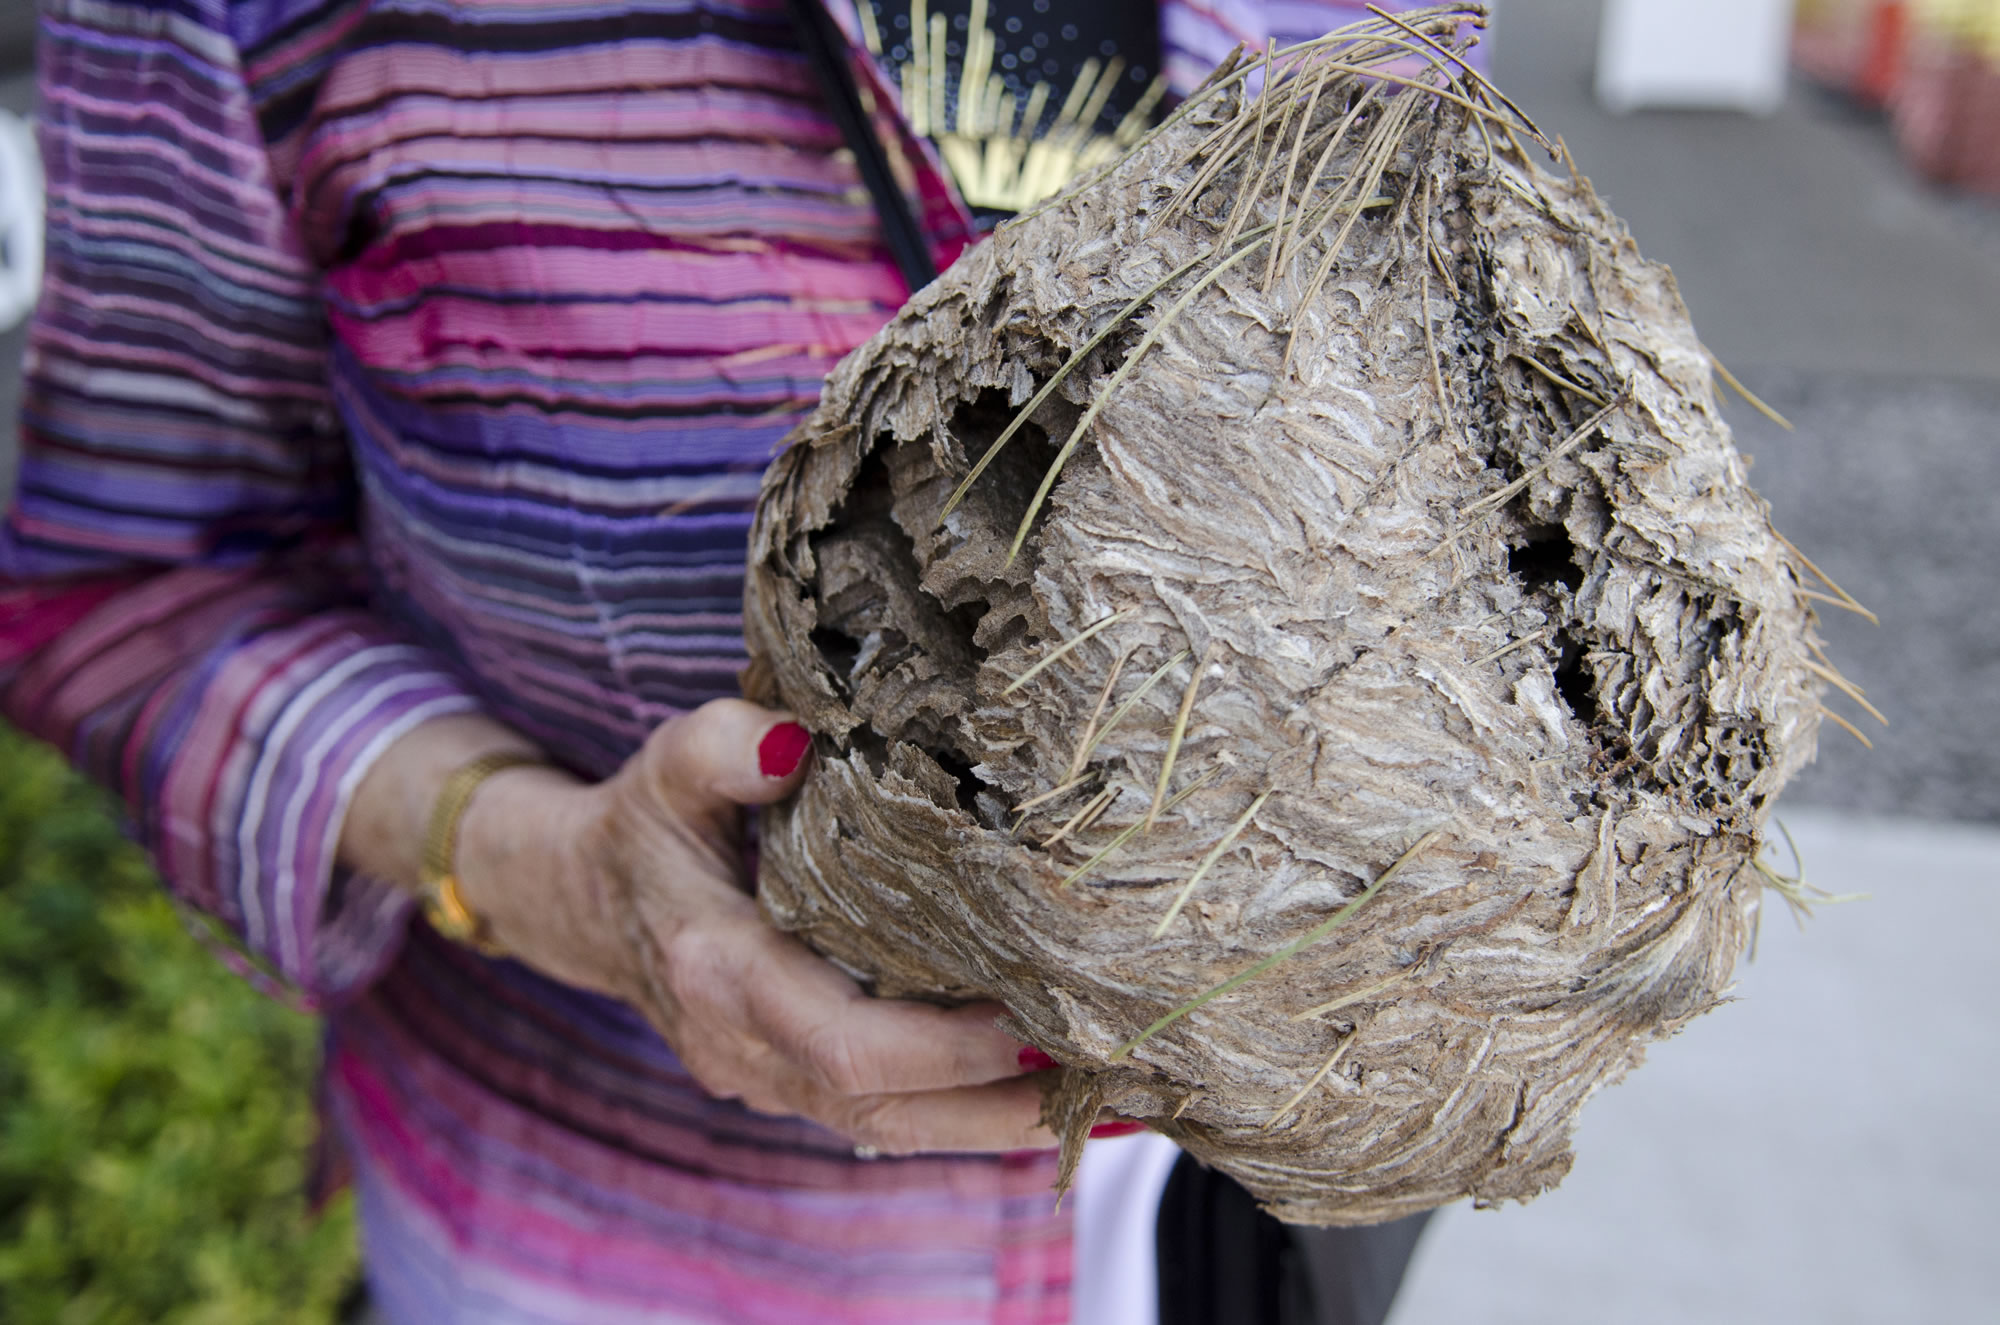 Lucia Falls: Mary Alice Carter holds an empty hornets' nest found on the East Fork of the Lewis River off Rock Creek Road.